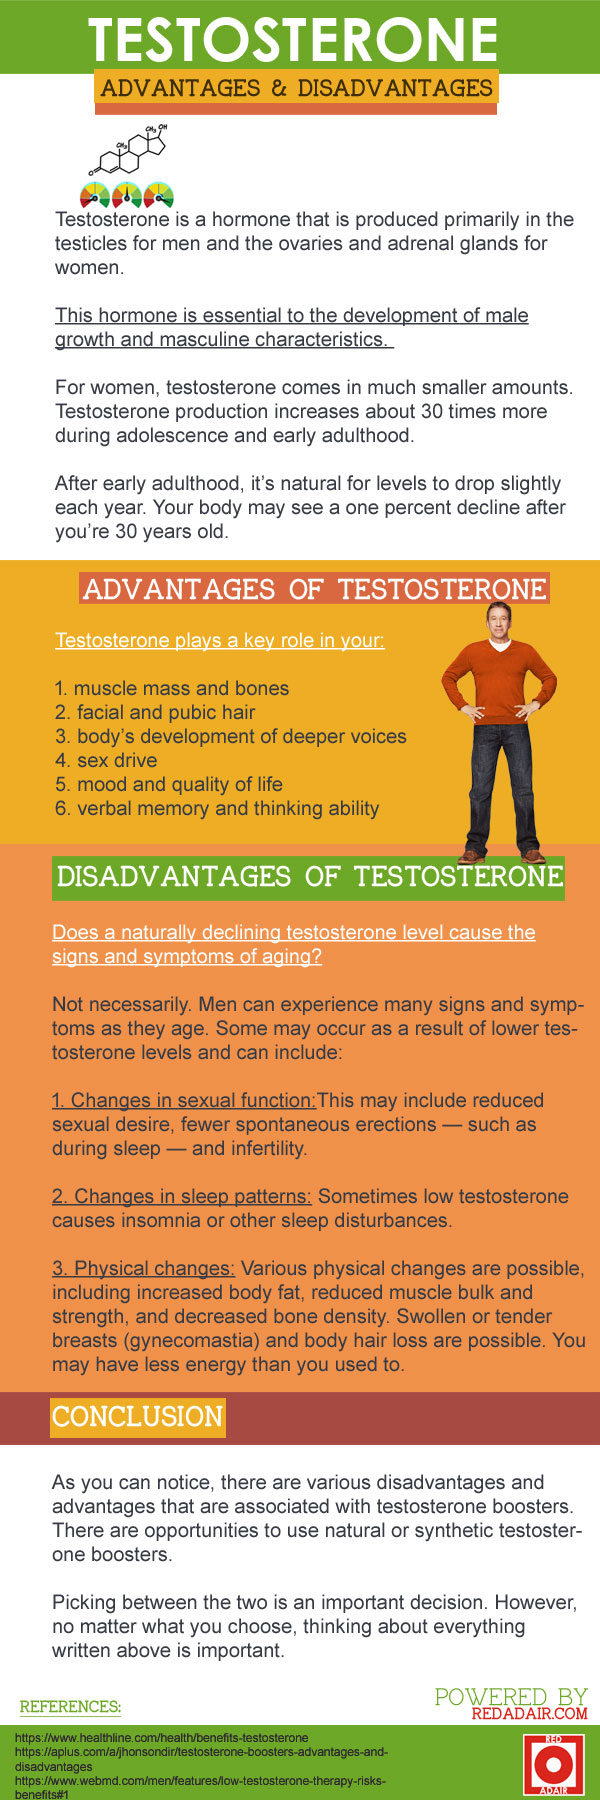 infographics on testosterone benefits and uses